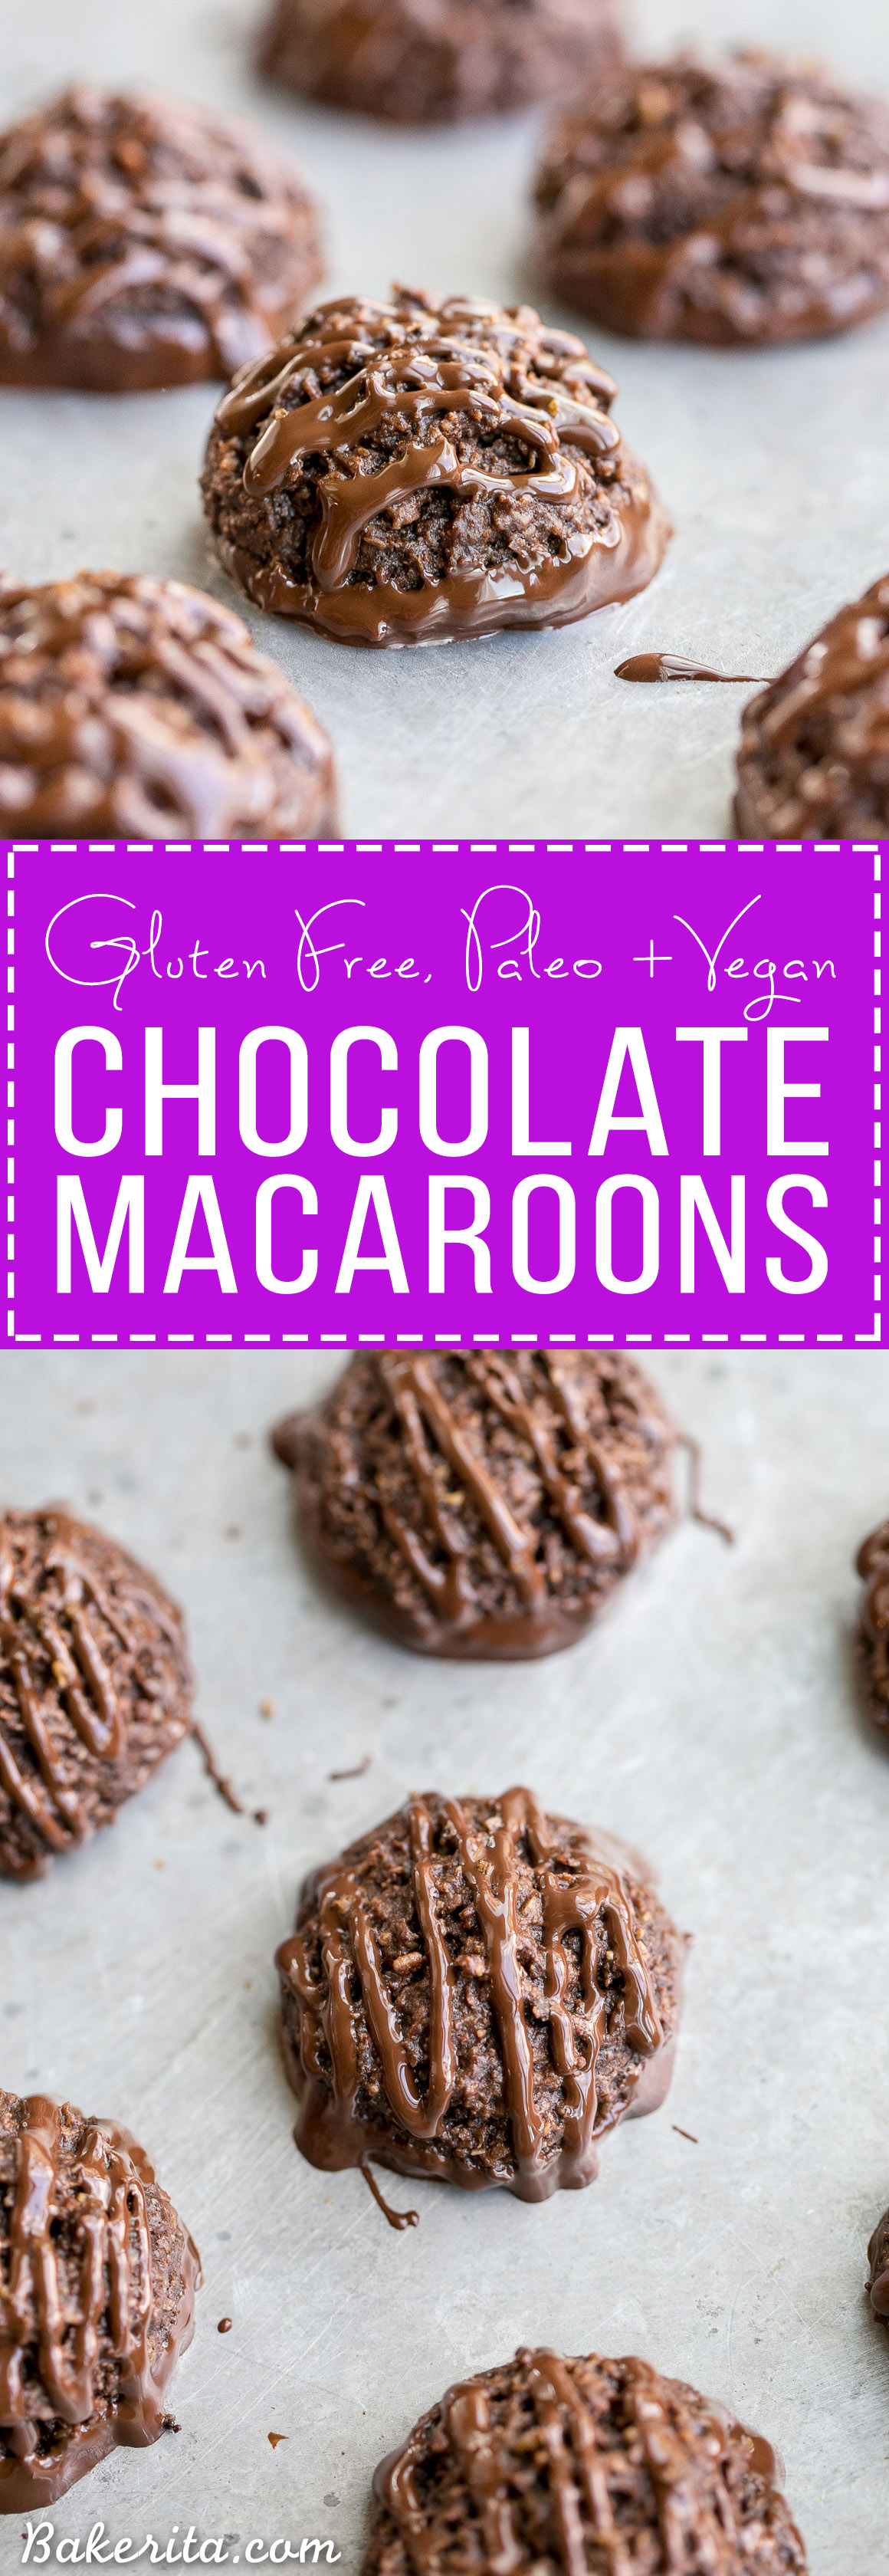 These Double Chocolate Macaroons are made super chocolatey with both cocoa powder and melted chocolate. These easy cookies are dipped and drizzled with chocolate, and they're gluten-free, Paleo + vegan.